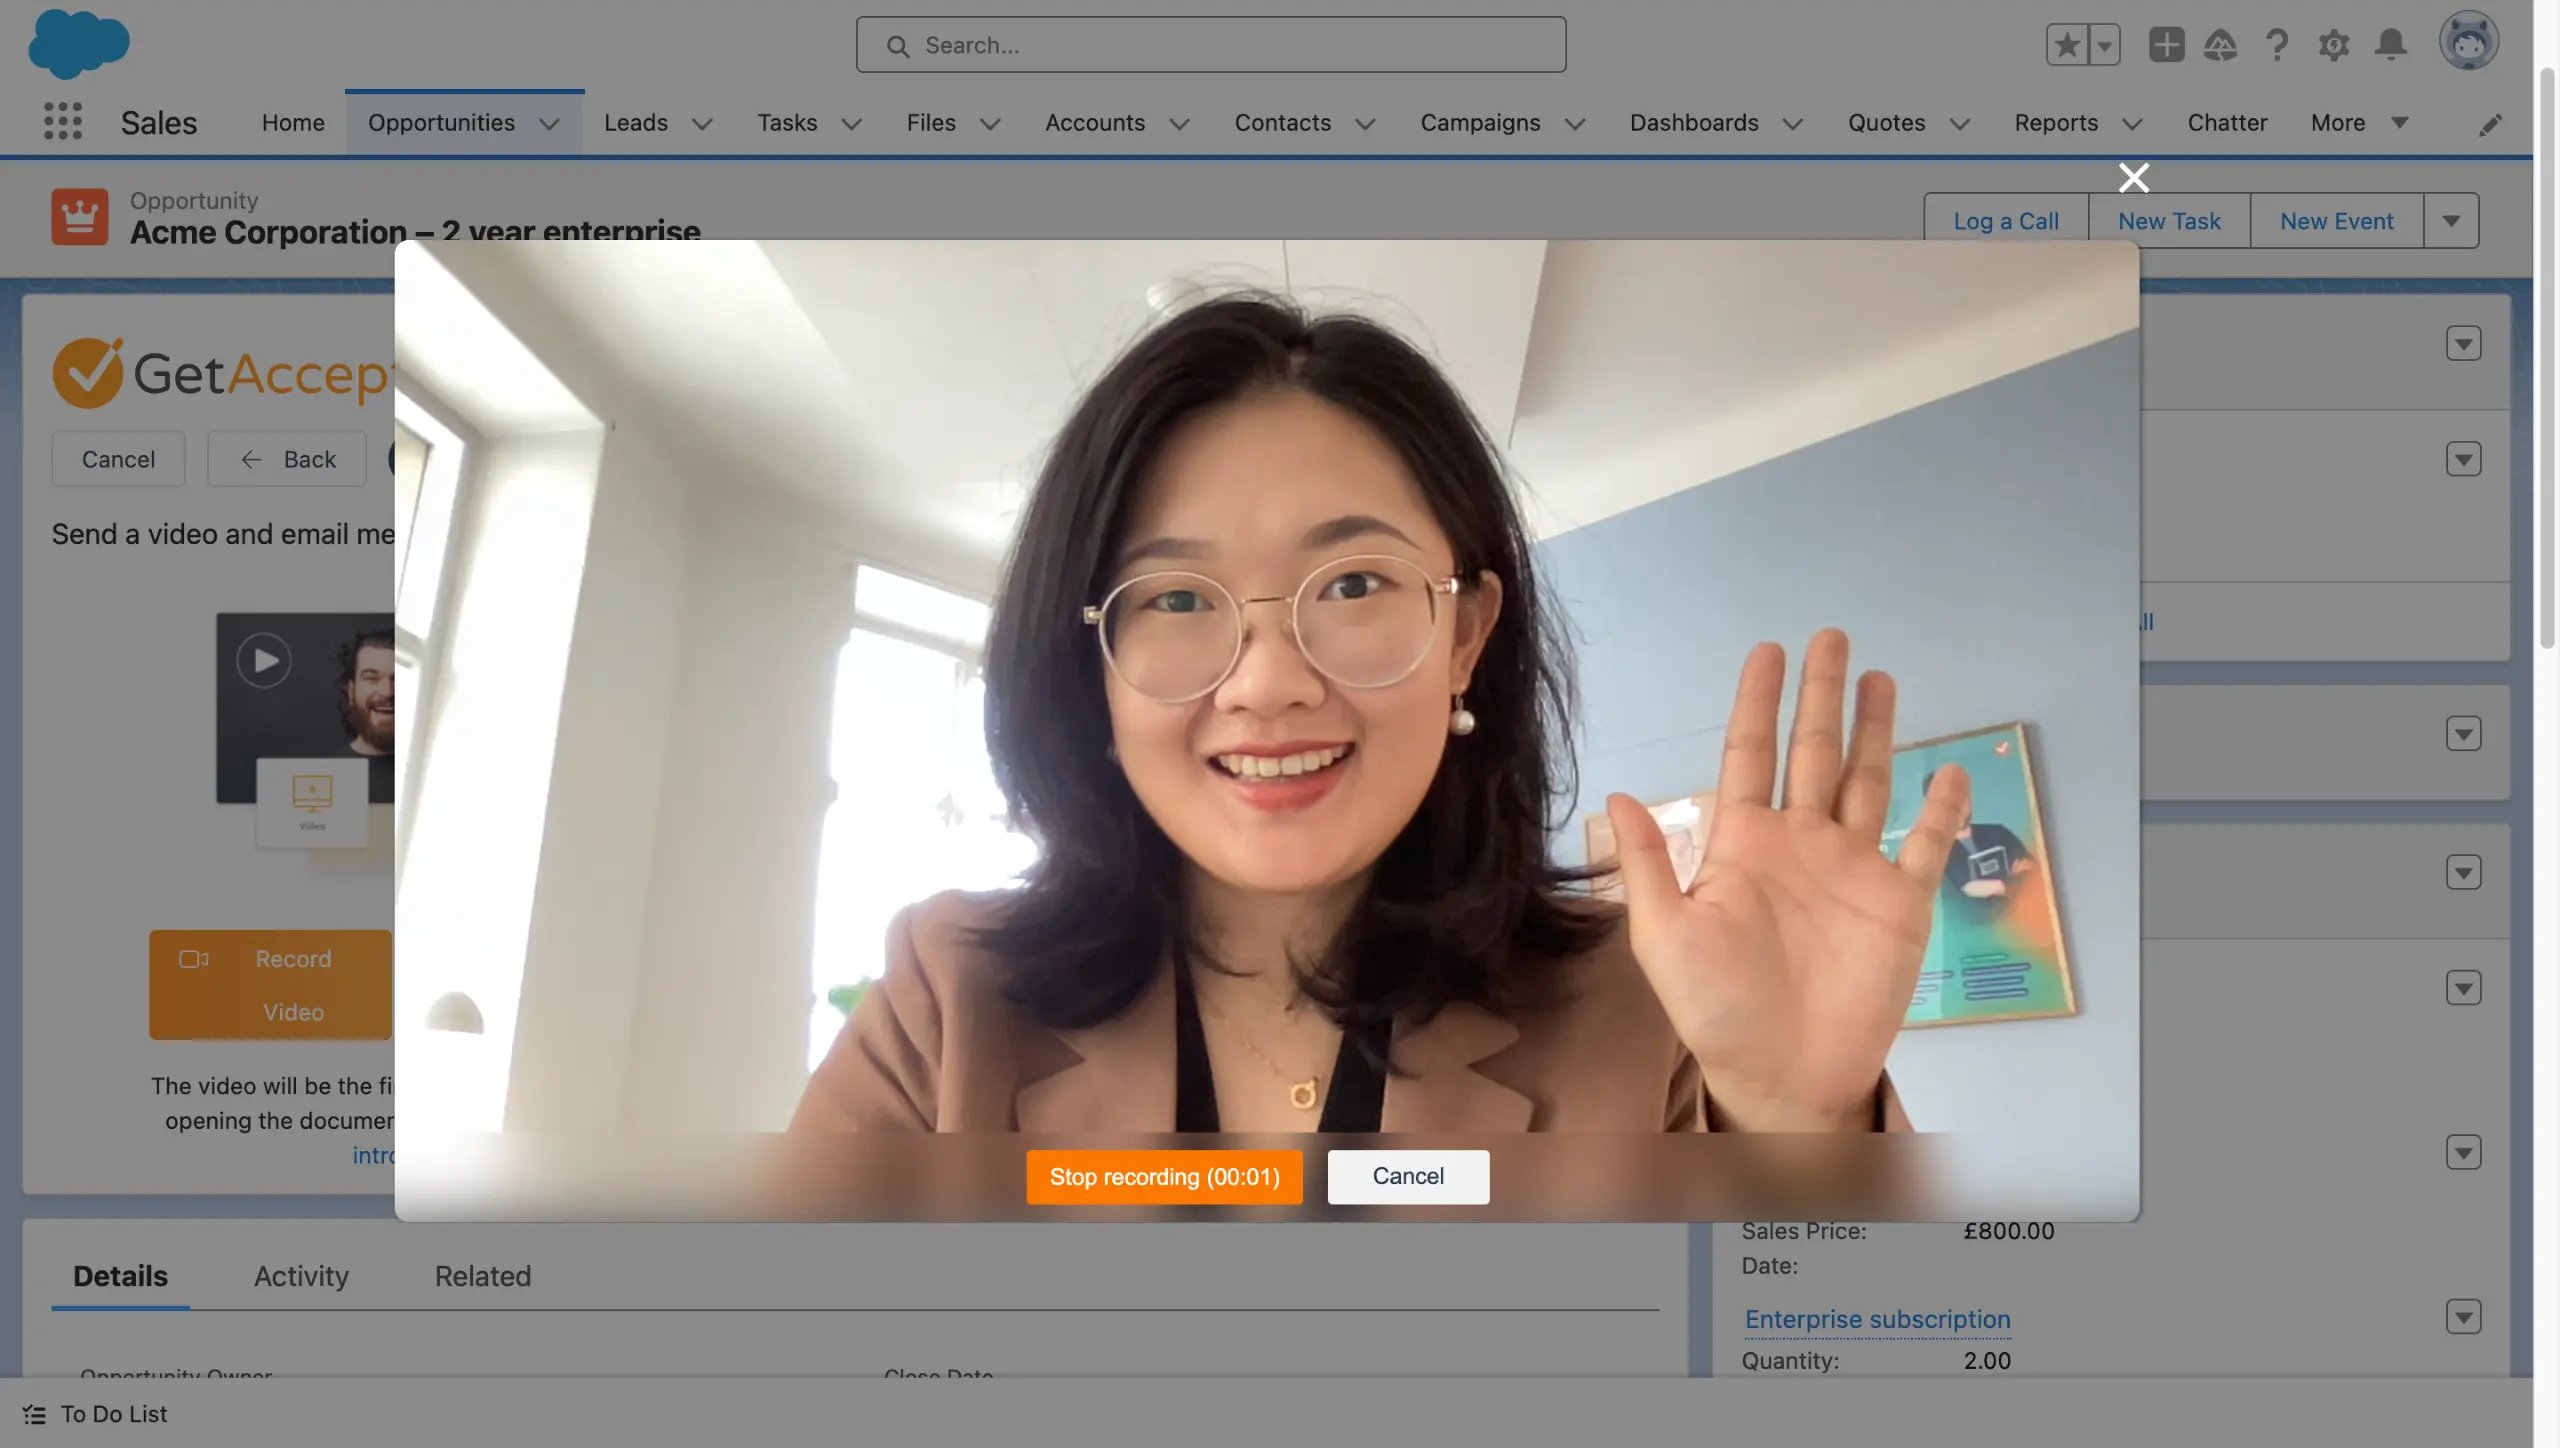 5. Optimize Salesforce with video engagement